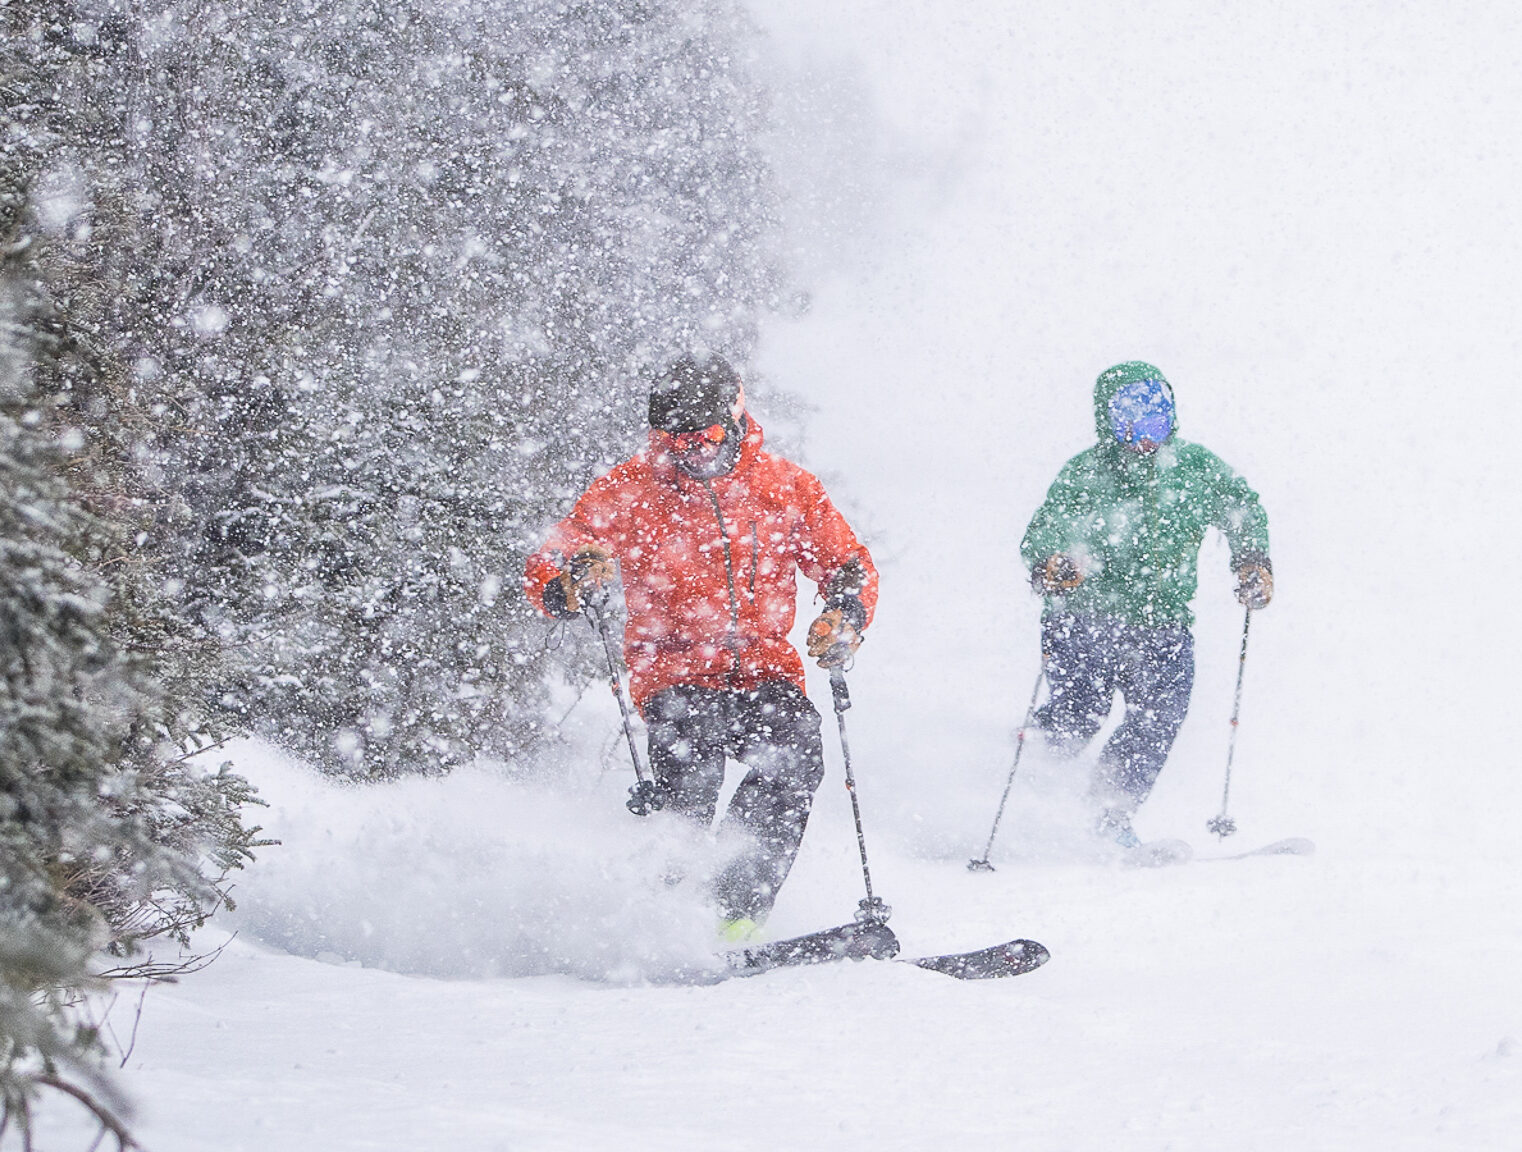 Two skiers in falling snow